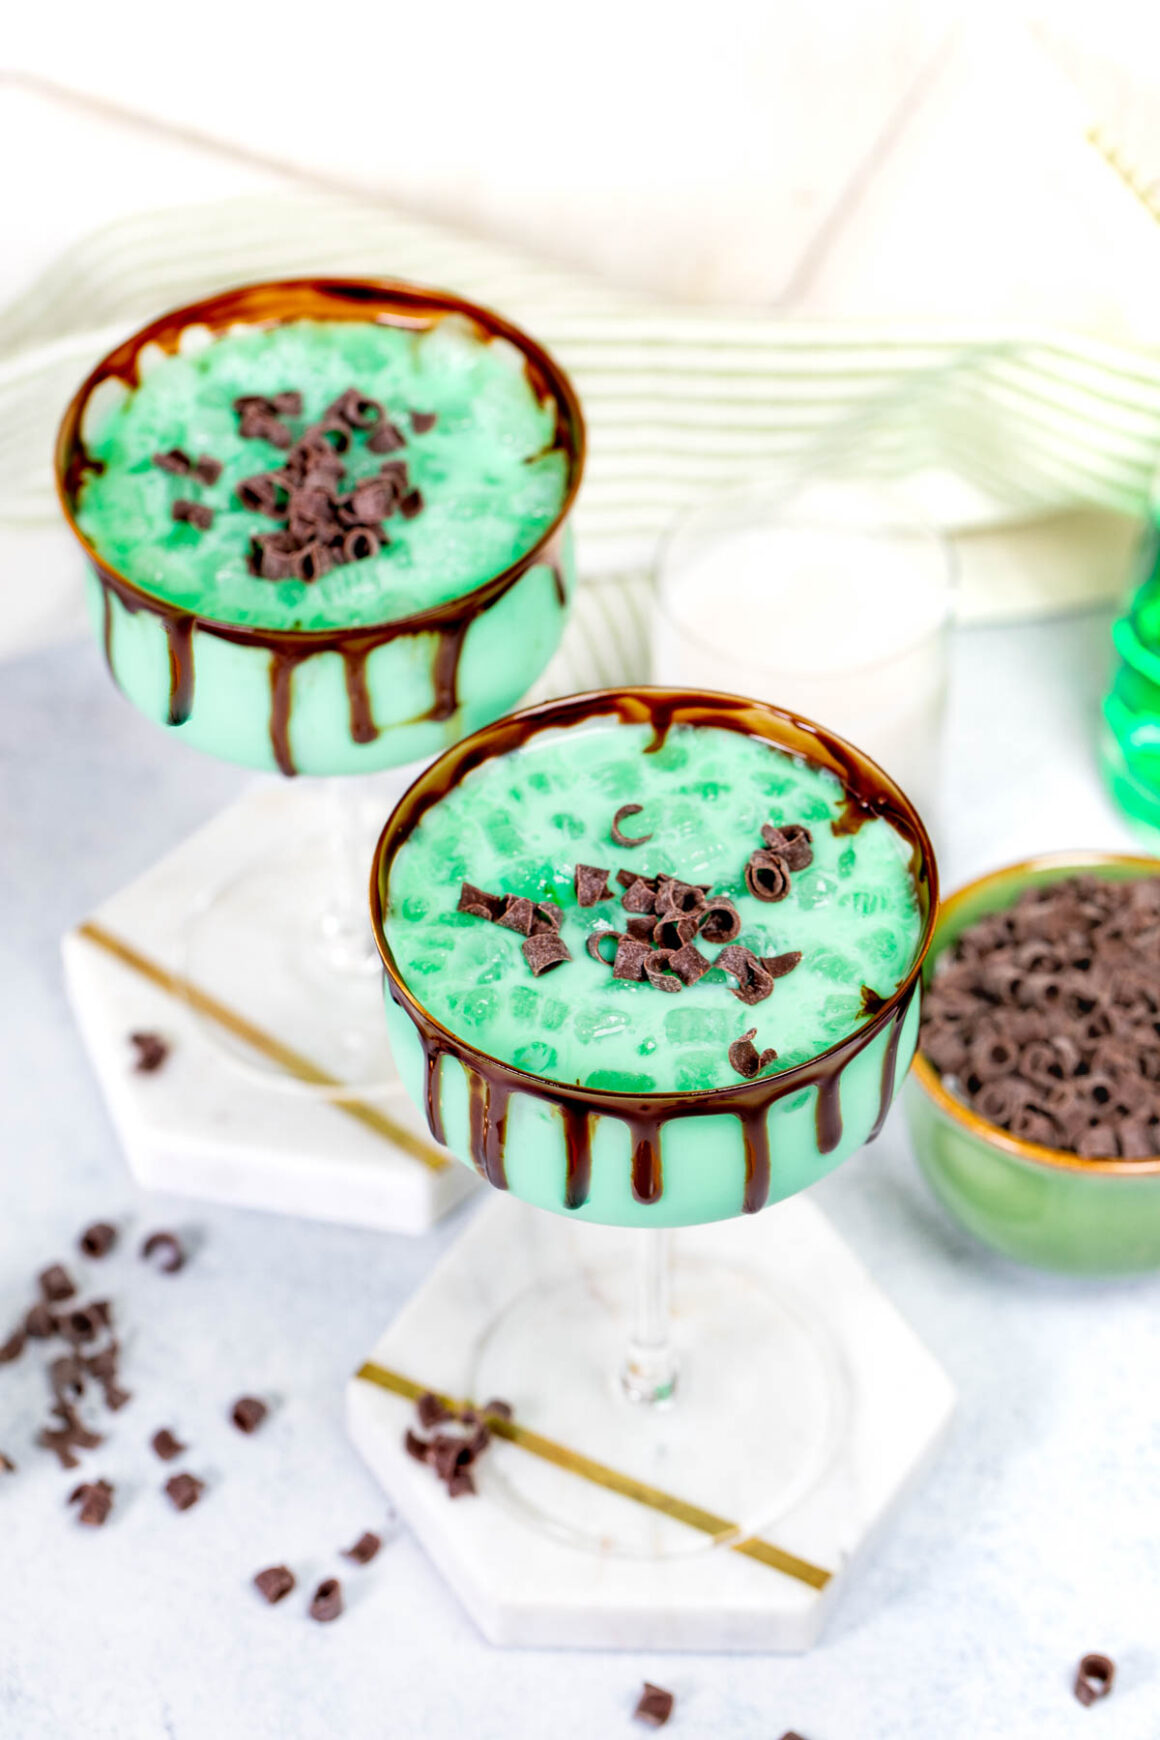 green martinis recipe with melted chocolate on the rim and chocolate curls as a garnish